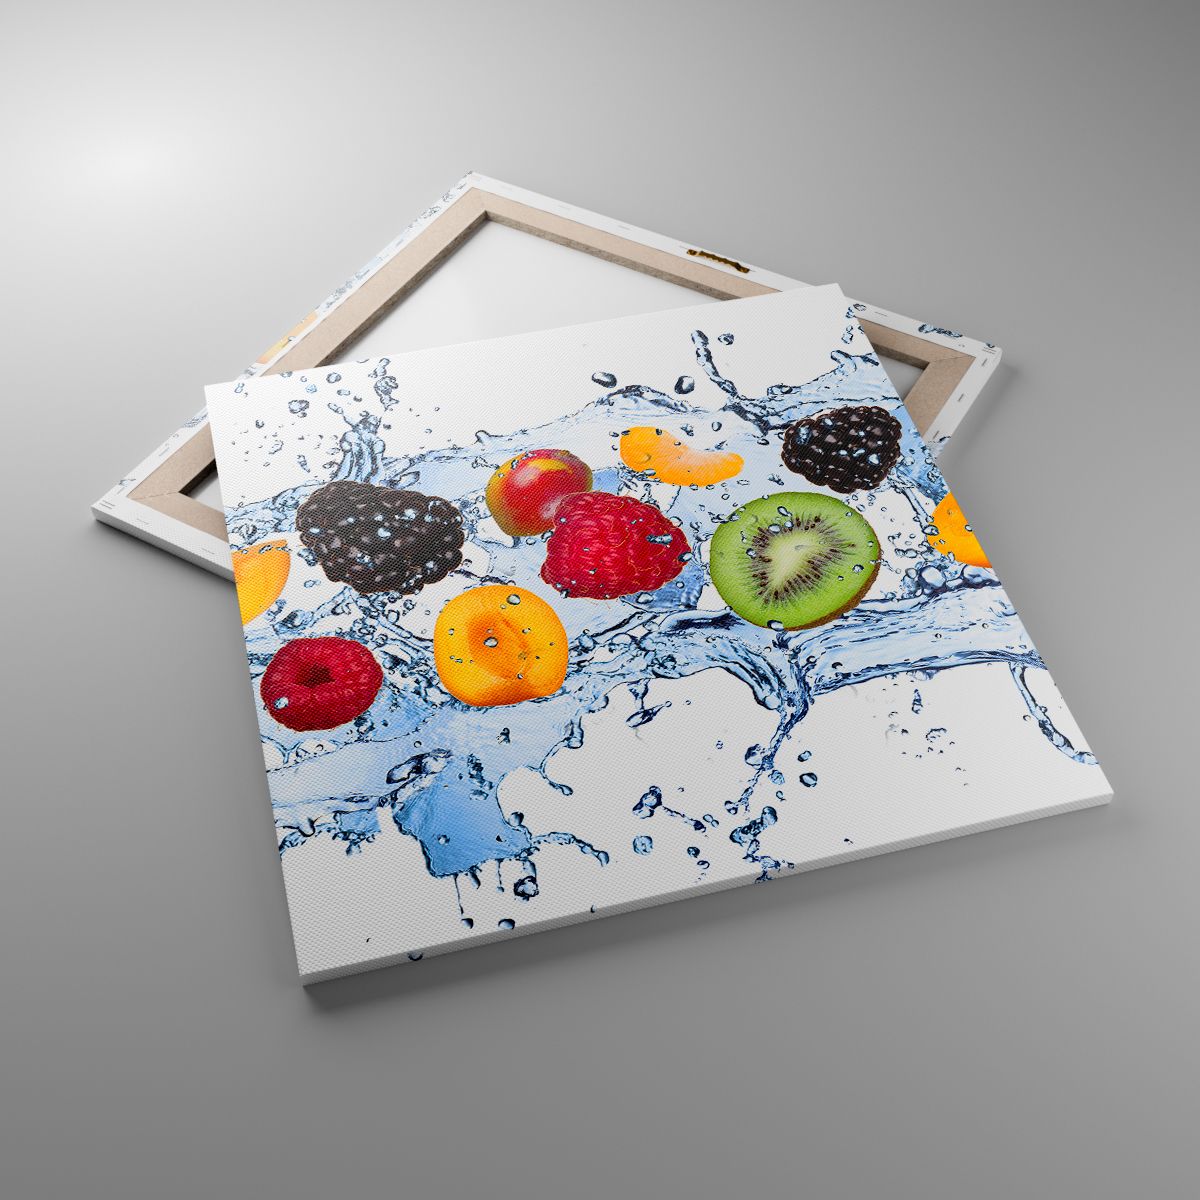 Canvas picture Fruit, Canvas picture Abstraction, Canvas picture 3D, Canvas picture Graphics, Canvas picture Water